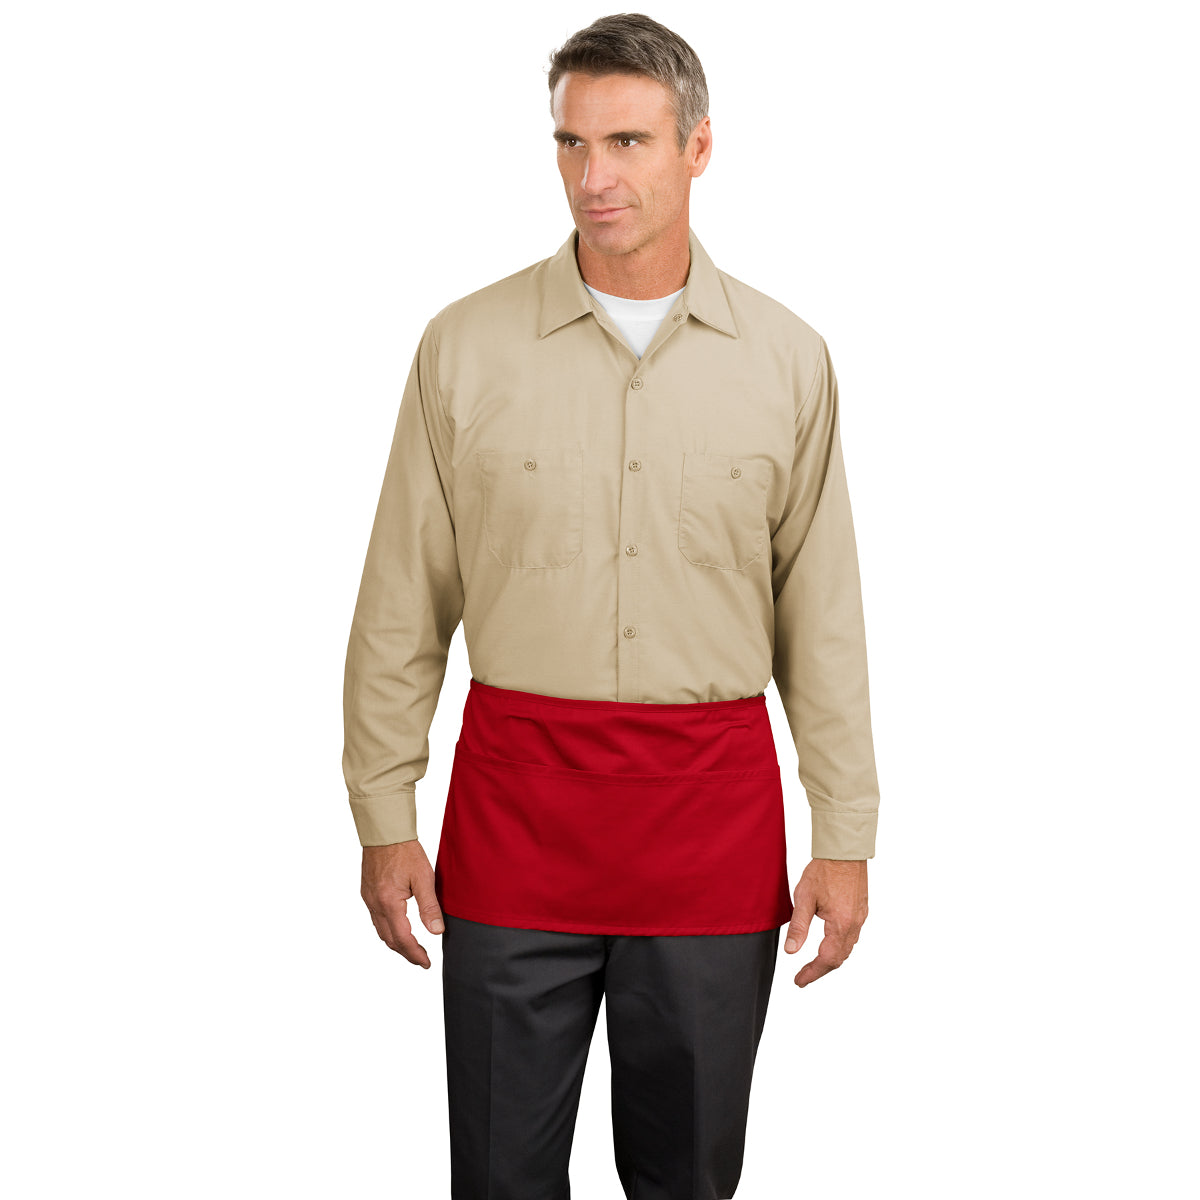 Waist Apron with Pockets Red